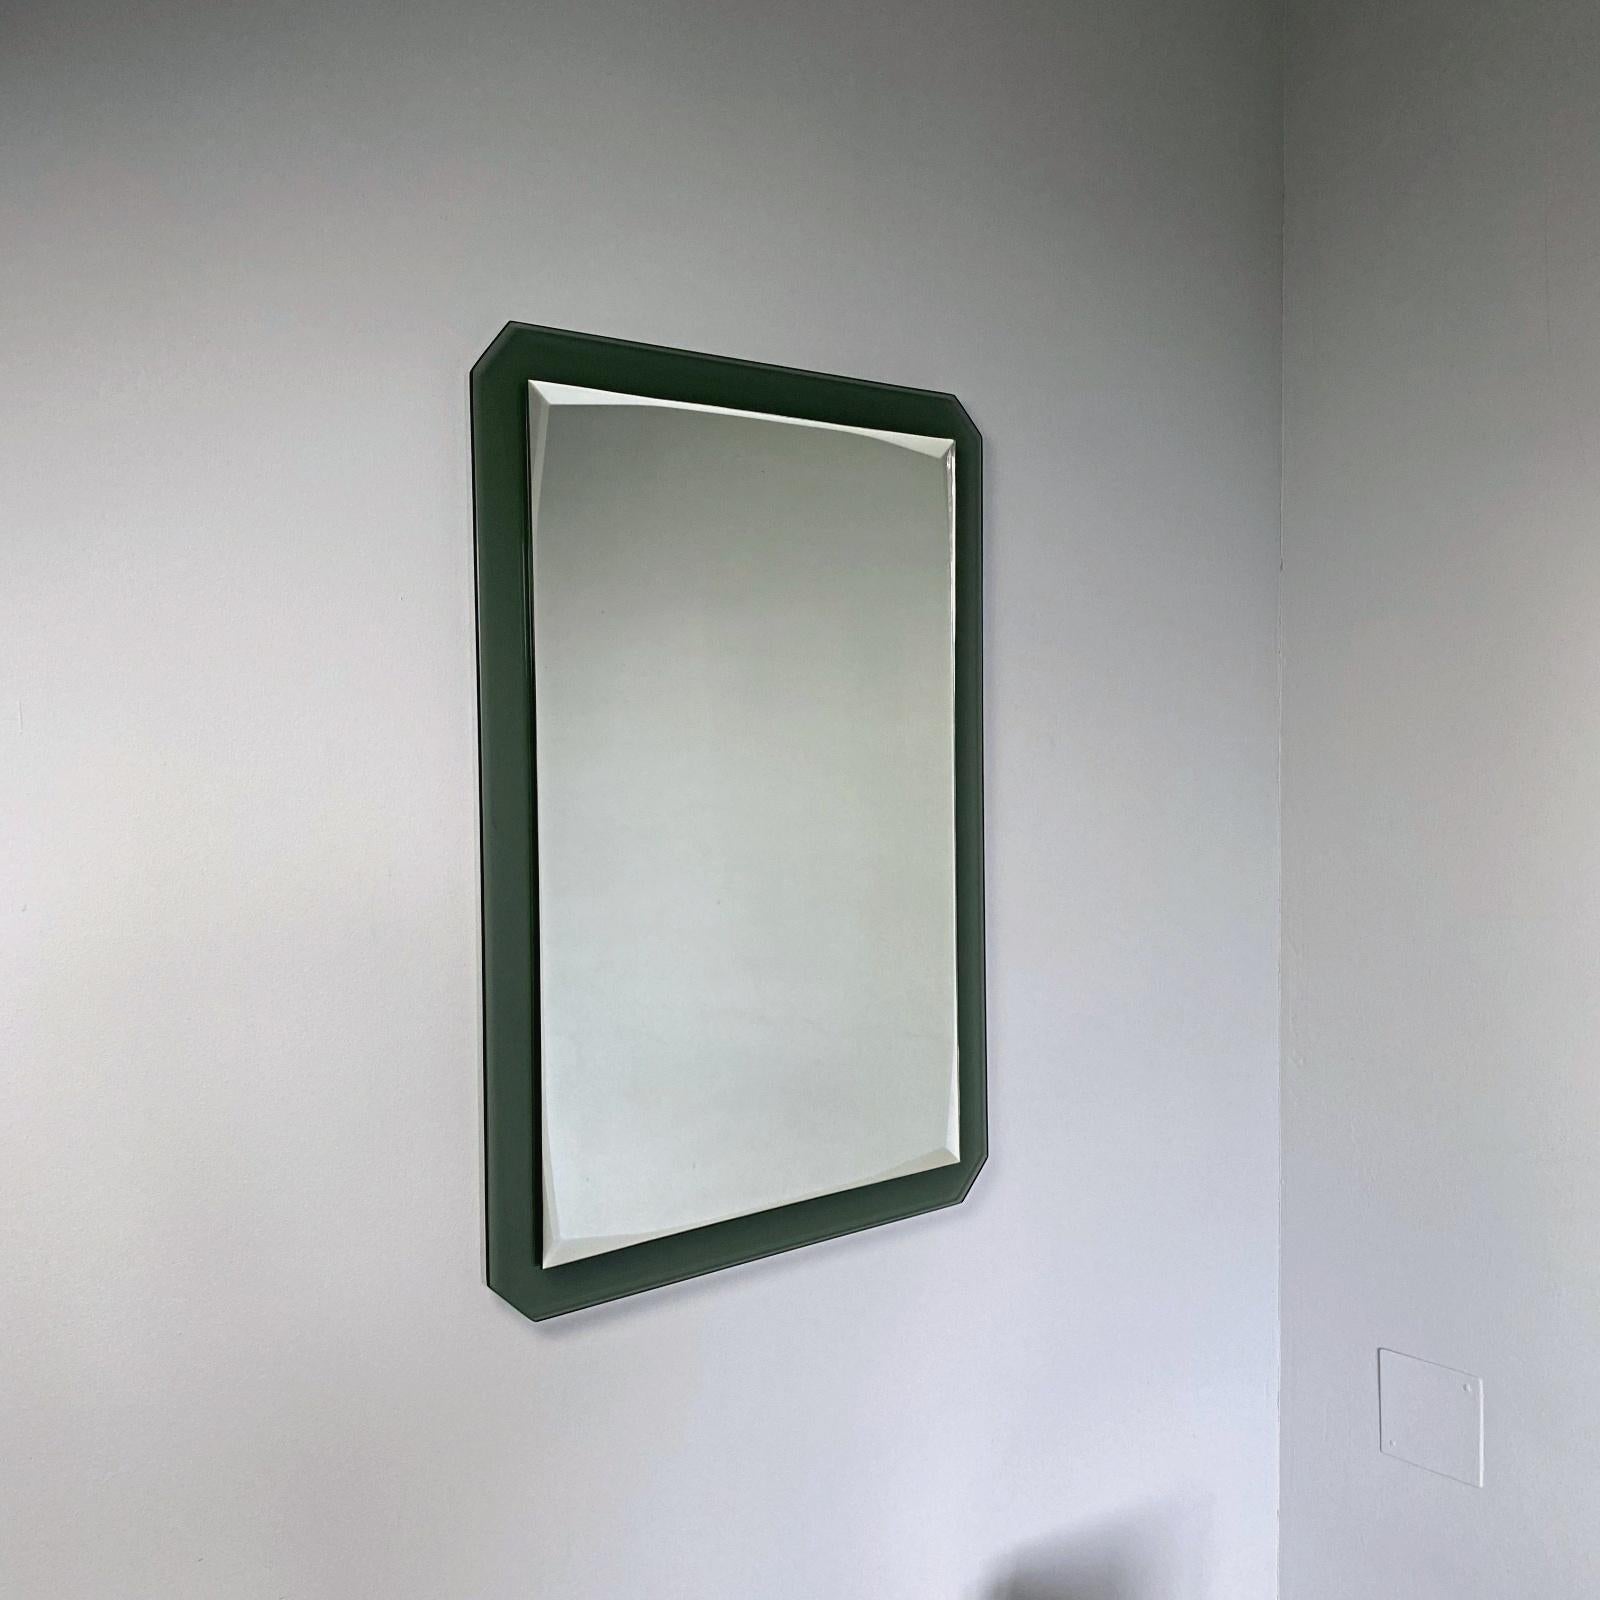 Beautiful rectangular midcentury faceted mirror with bottle green crystal glass frame made by Cristal Art in 1960s, Italy. The mirror can also be hung horizontally. The mirror is in a very good condition, without any chips or